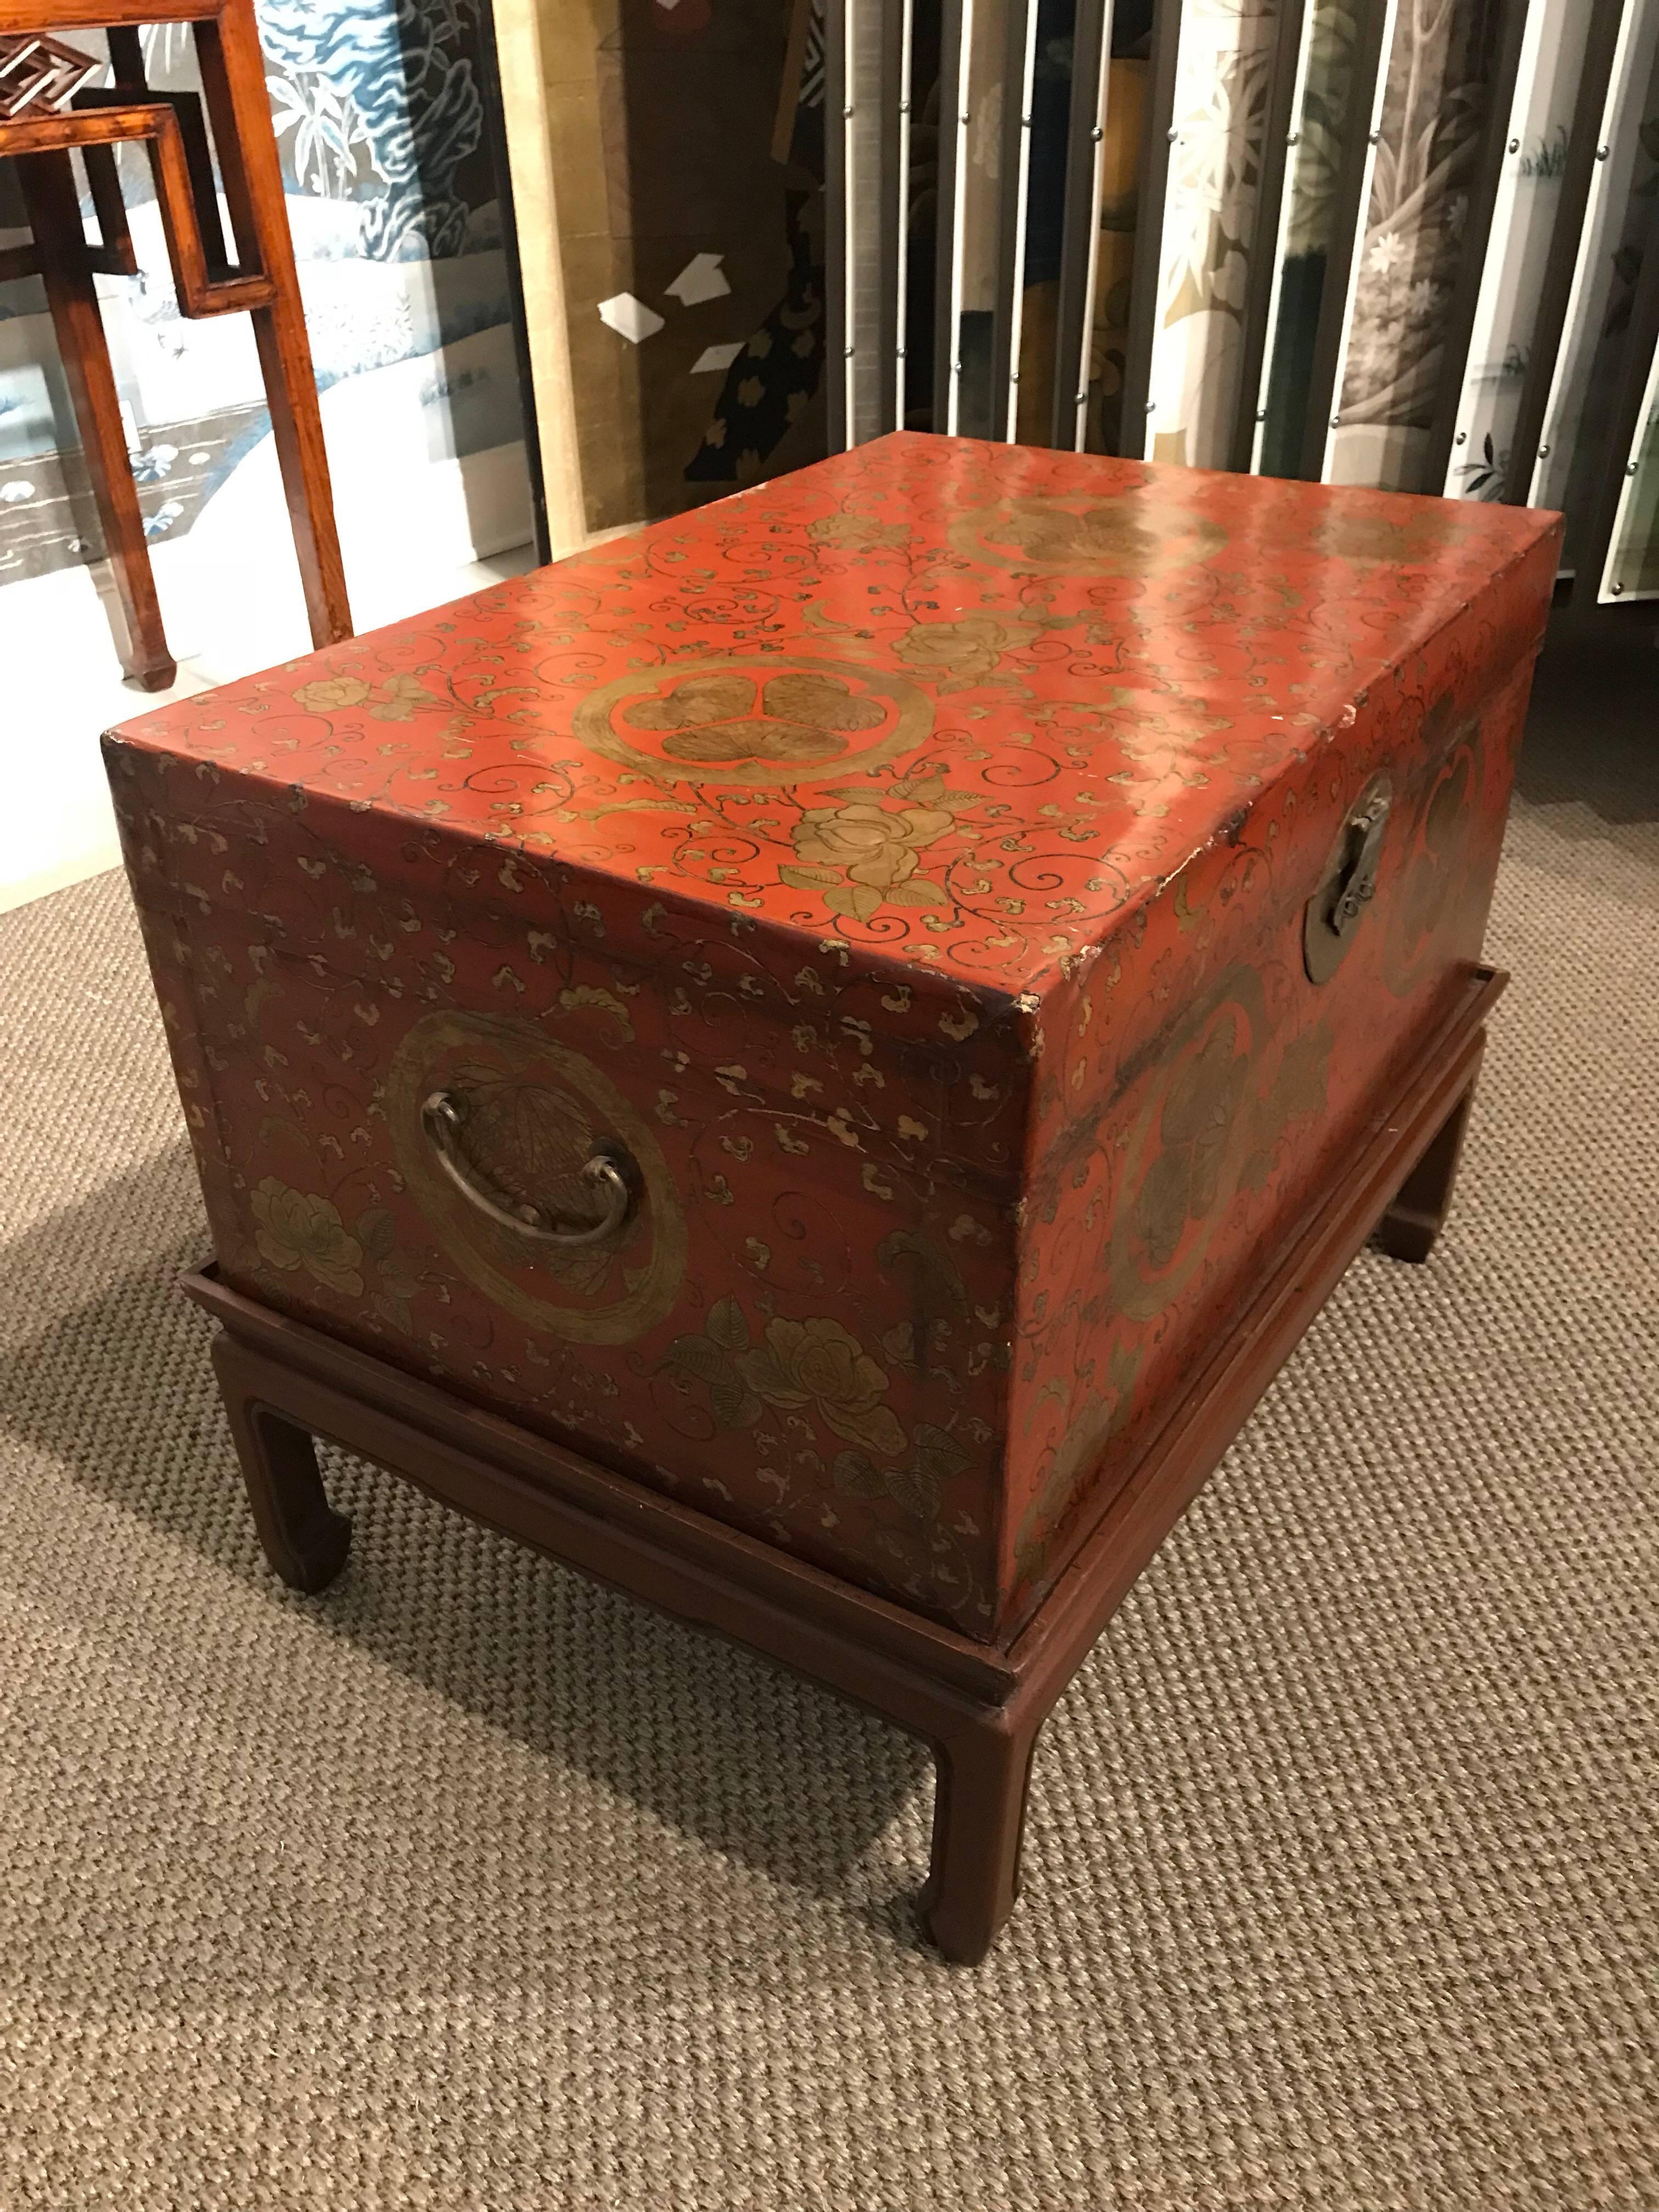 Chinese red leather trunk, circa 1920. This trunk is very decorative and unusual, since the gold design on the outside is Japanese crests and vines. 

On wooden stand. Height listed is total height on stand.